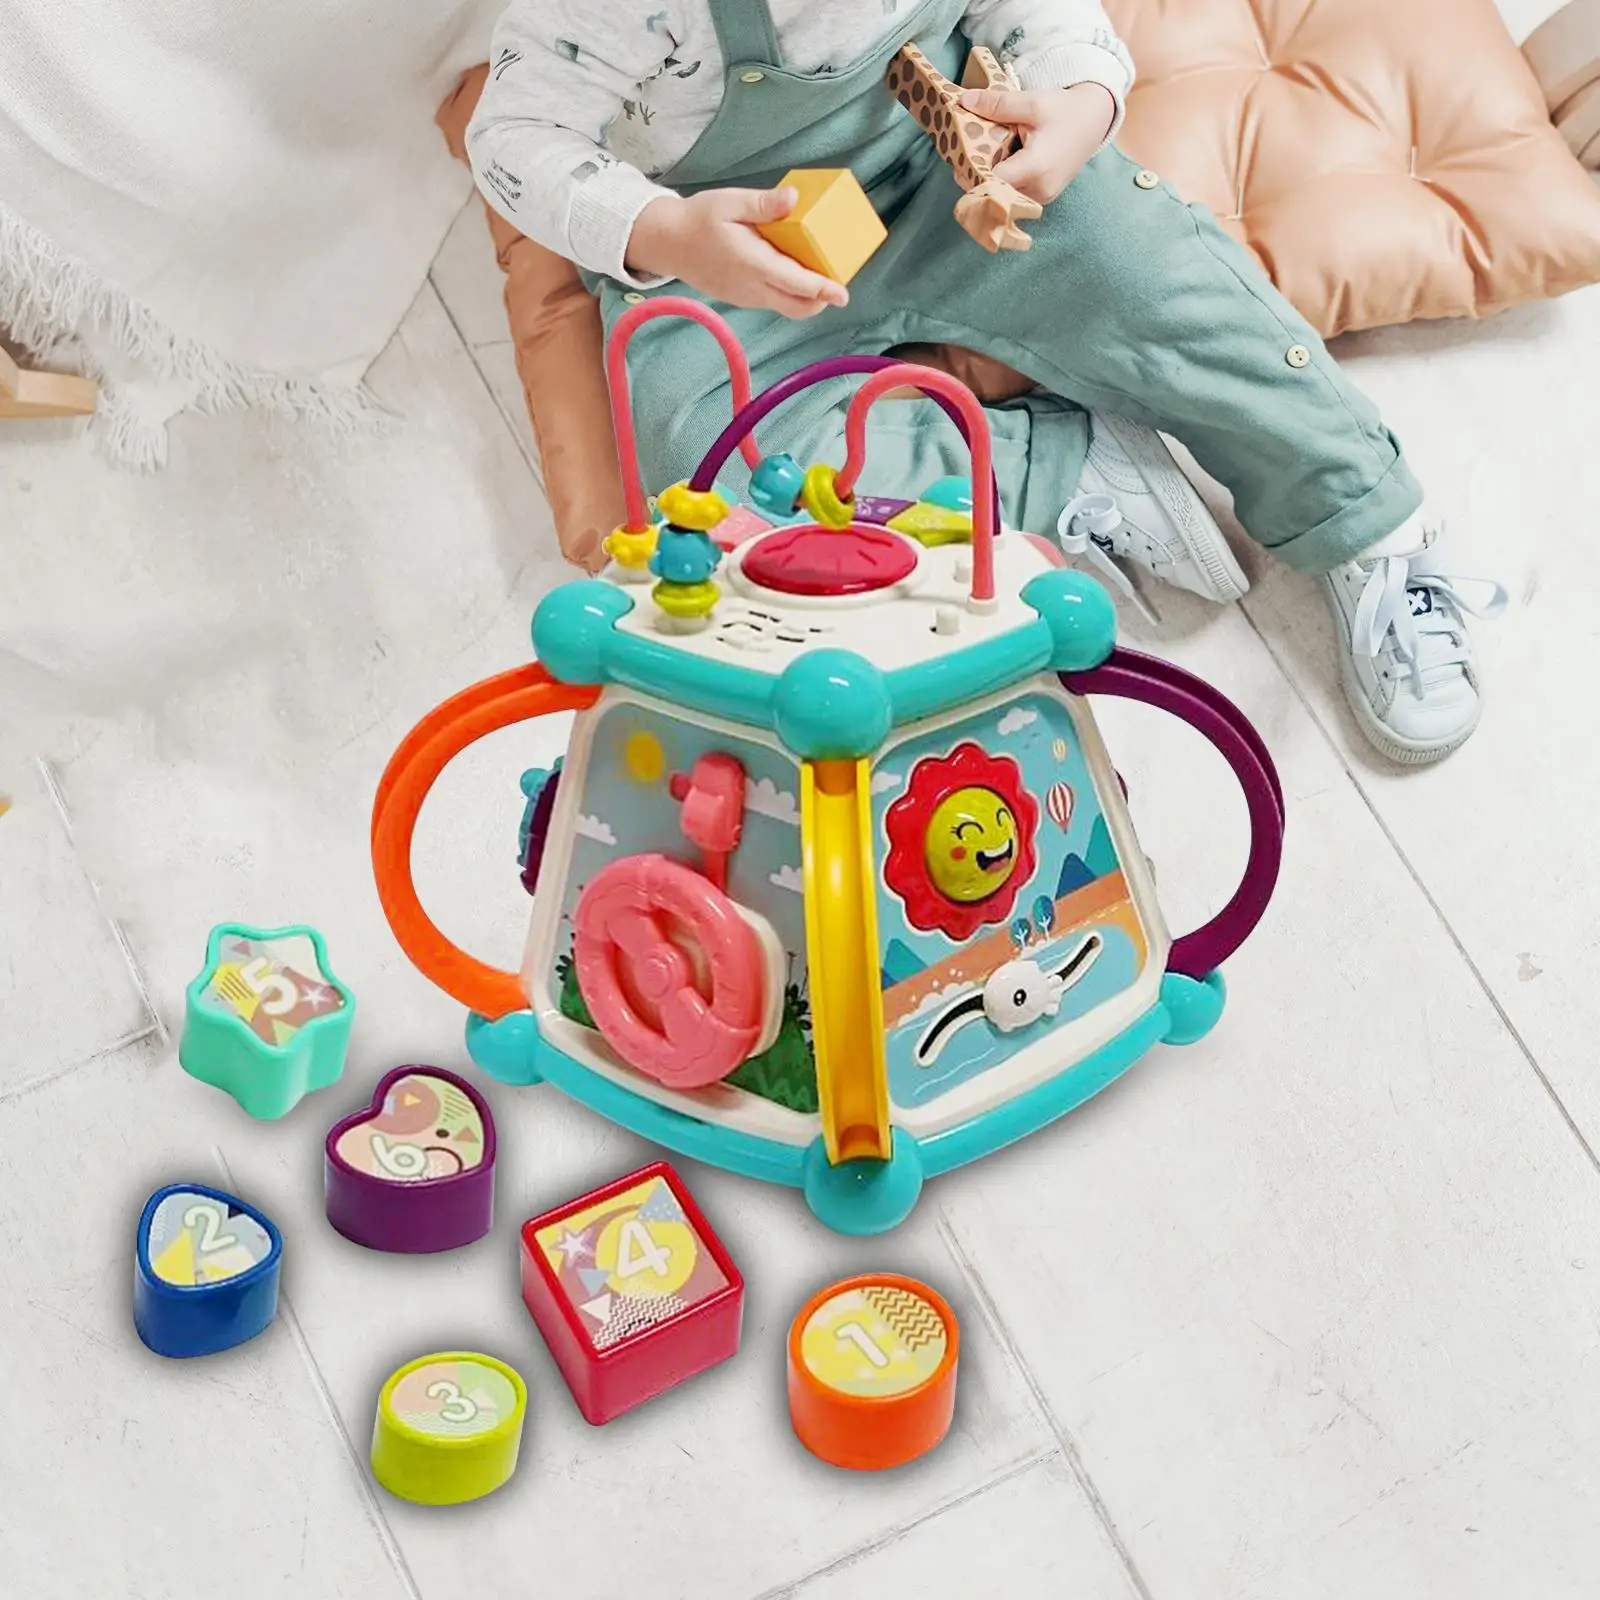 Baby Musical Toys Early Development with Lights Montessori Educational Toys Activity Cube Toy for Toddlers Boys Girls Kids Gift